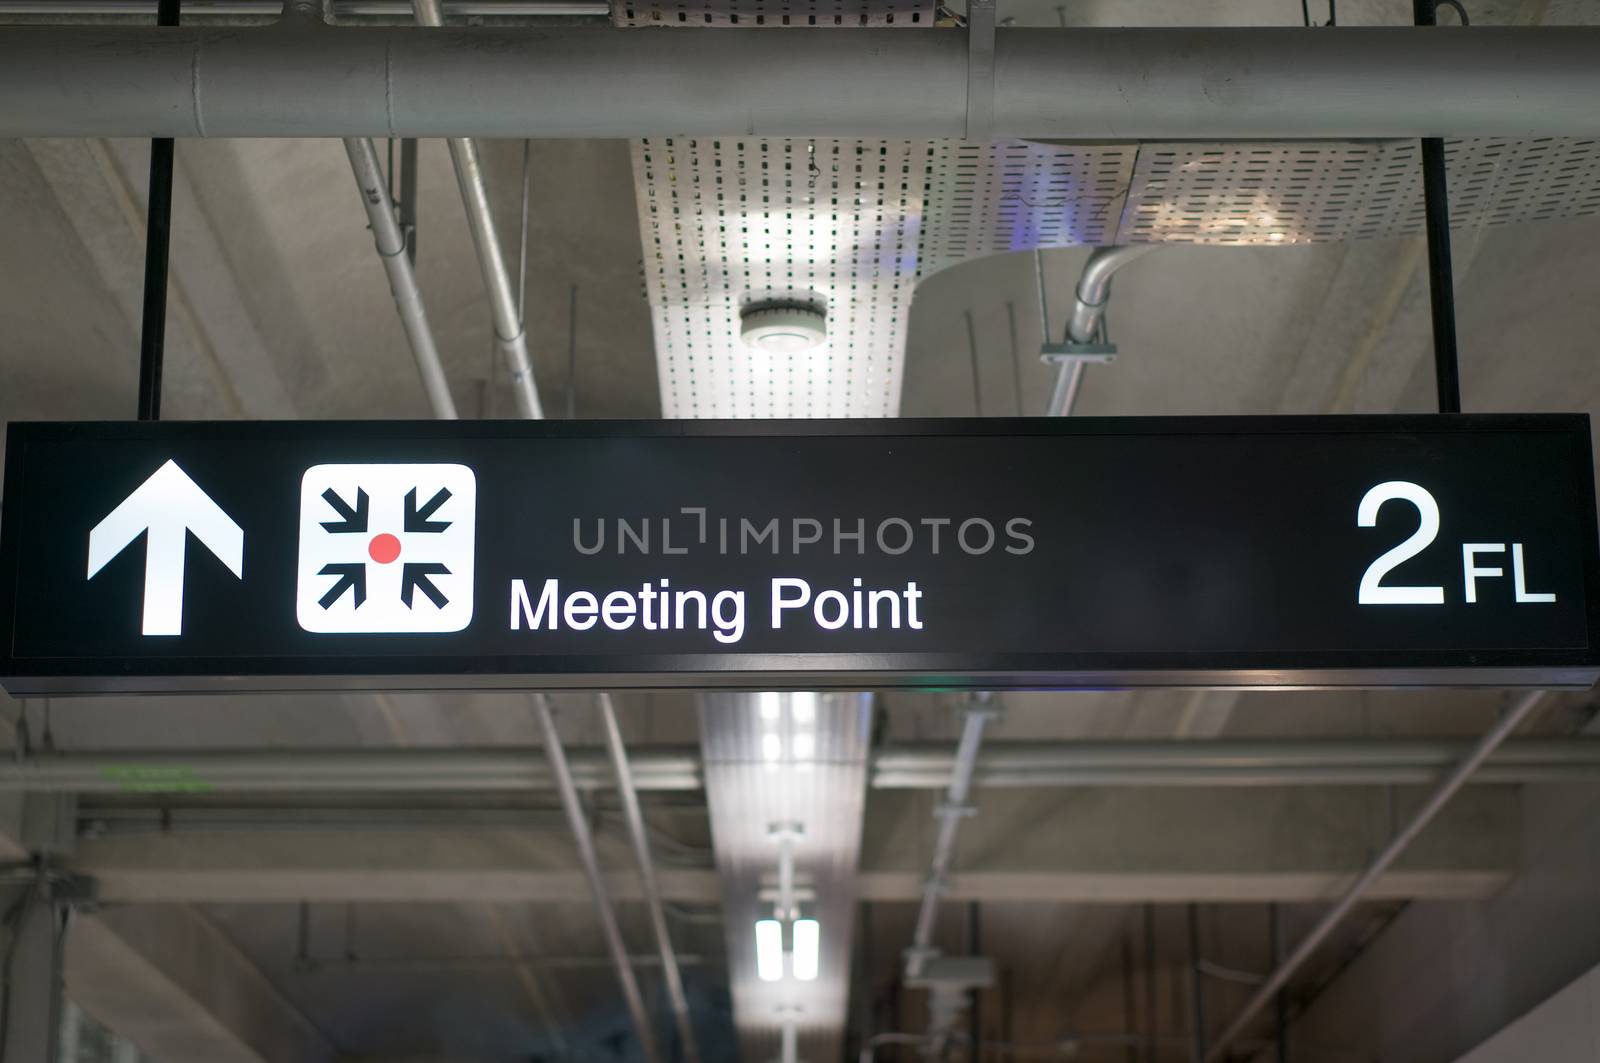 Meeting point information board sign with white character on black background at international airport terminal.